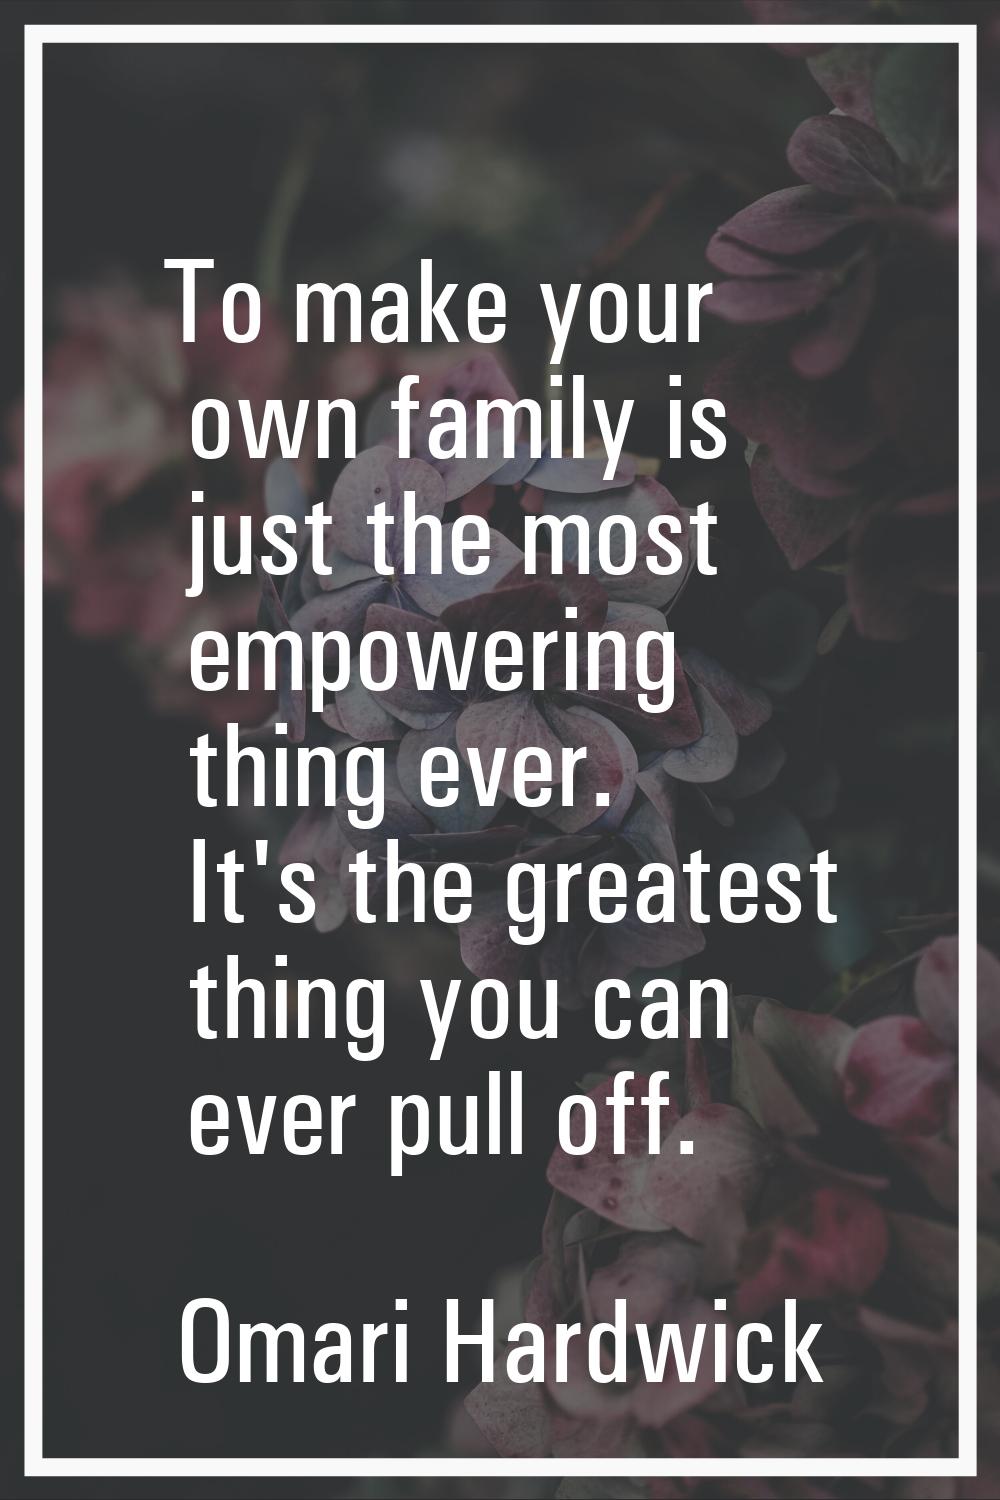 To make your own family is just the most empowering thing ever. It's the greatest thing you can eve